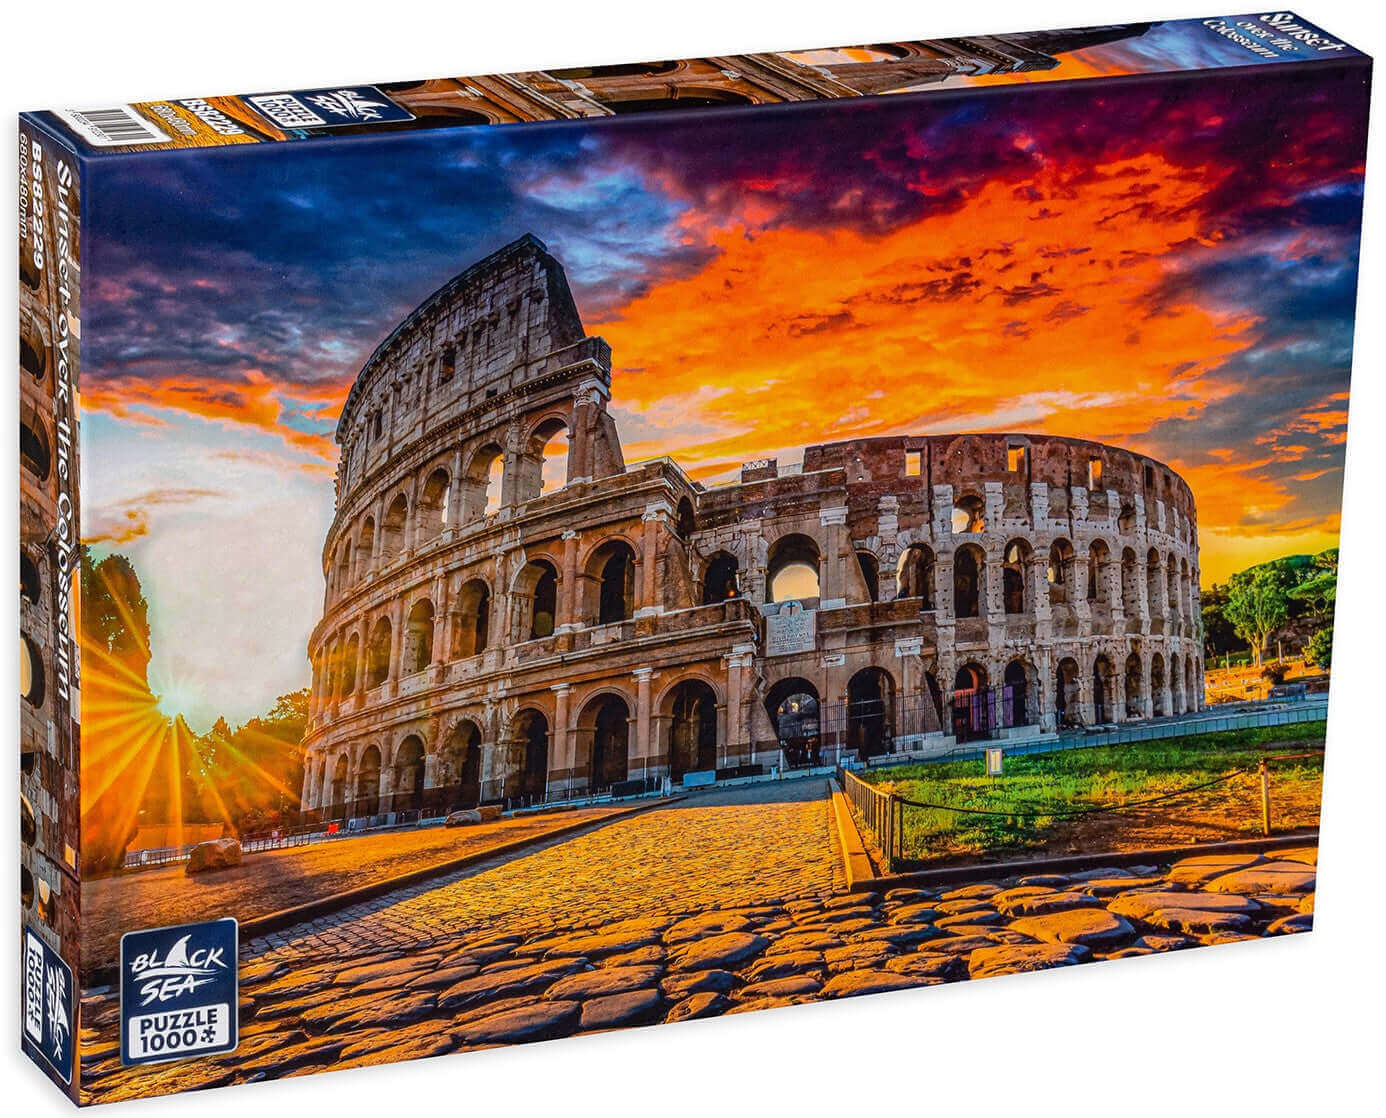 Puzzle Black Sea 1000 pieces - Sunset over the Colosseum, -